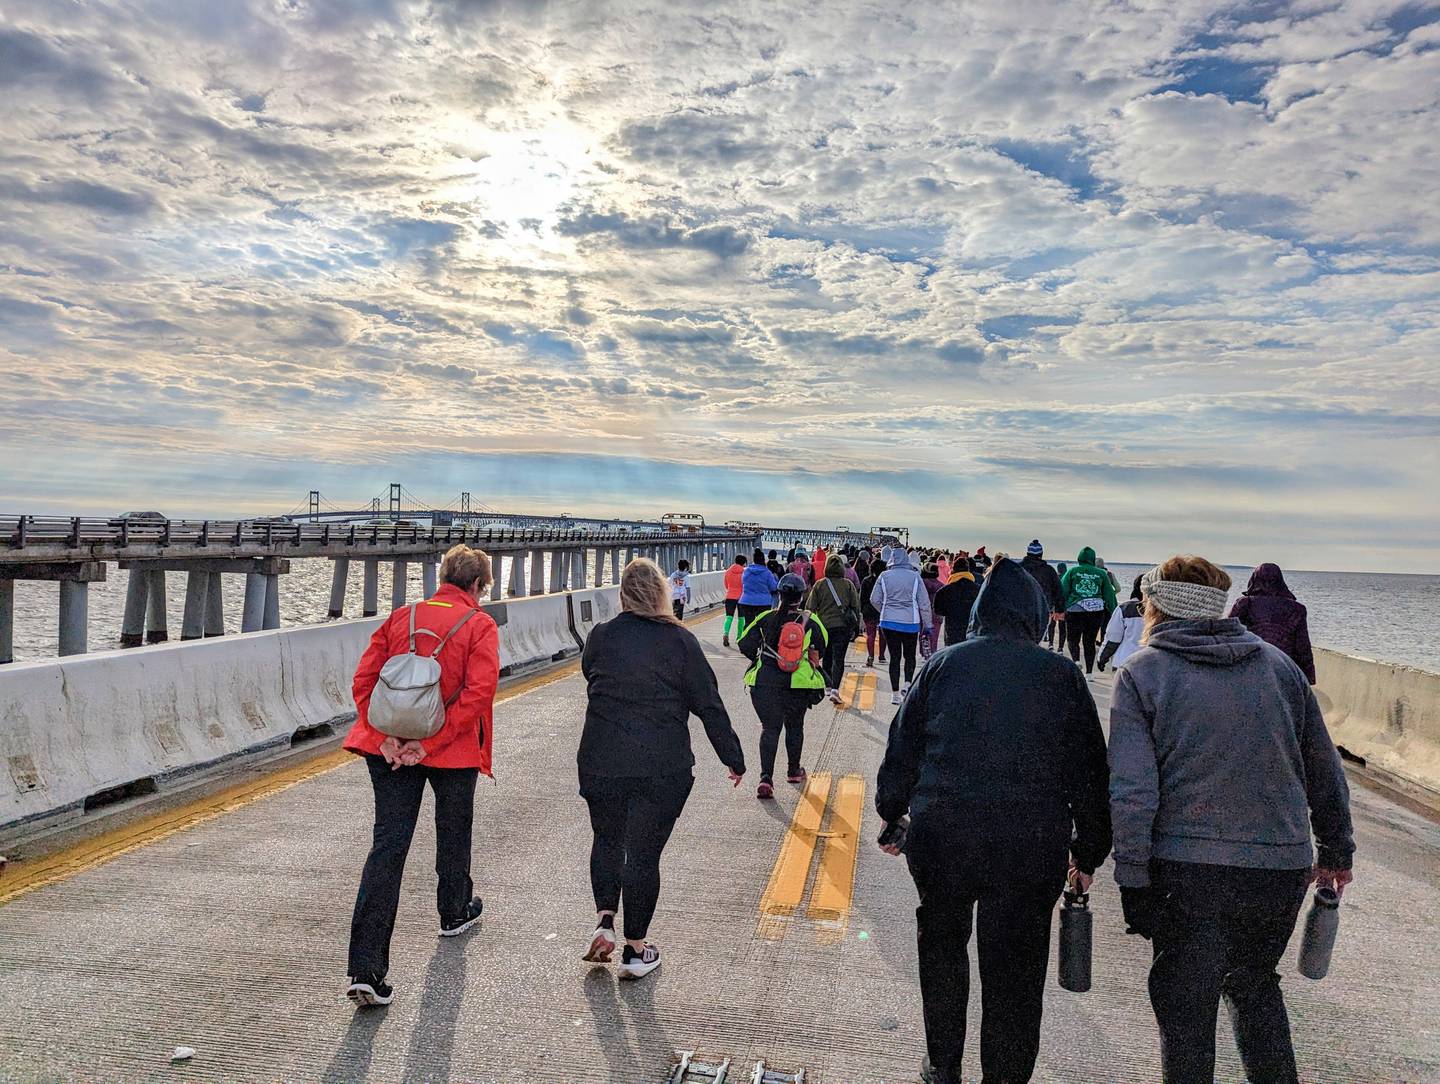 The Bay Bridge Run on Sunday started with temperatures in the low 40s, with a brisk breeze atop the Chesapeake Bay Bridge that made it feel colder. It was still a sold-out crowd of participants.